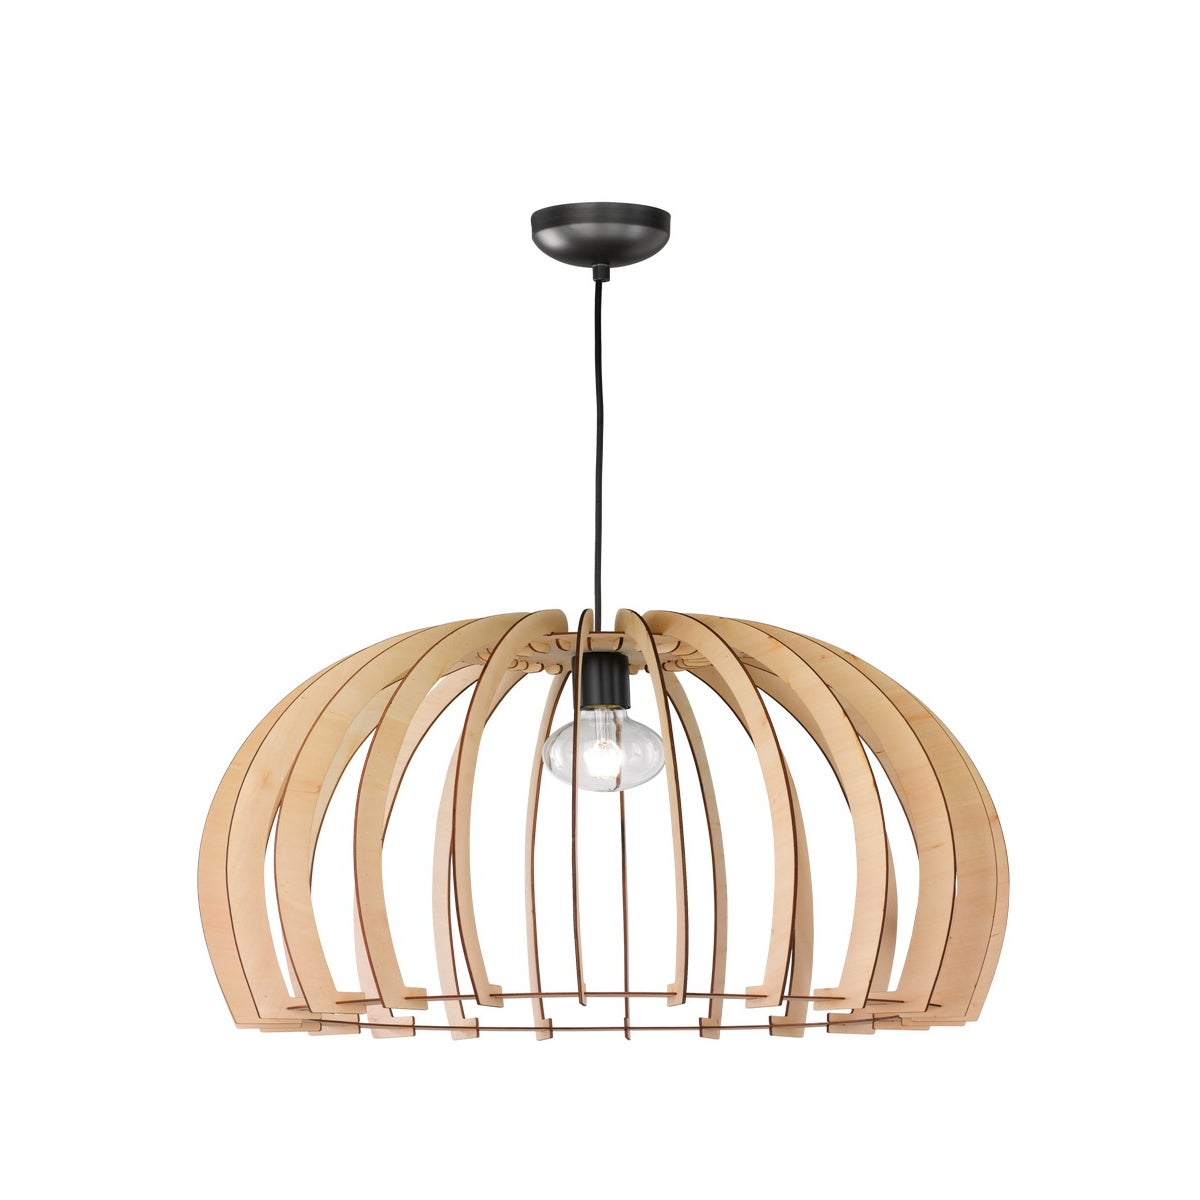 with Wood ArnsbergerLicht Dome | deals Shade Color in Large Wood Pendant - Inc